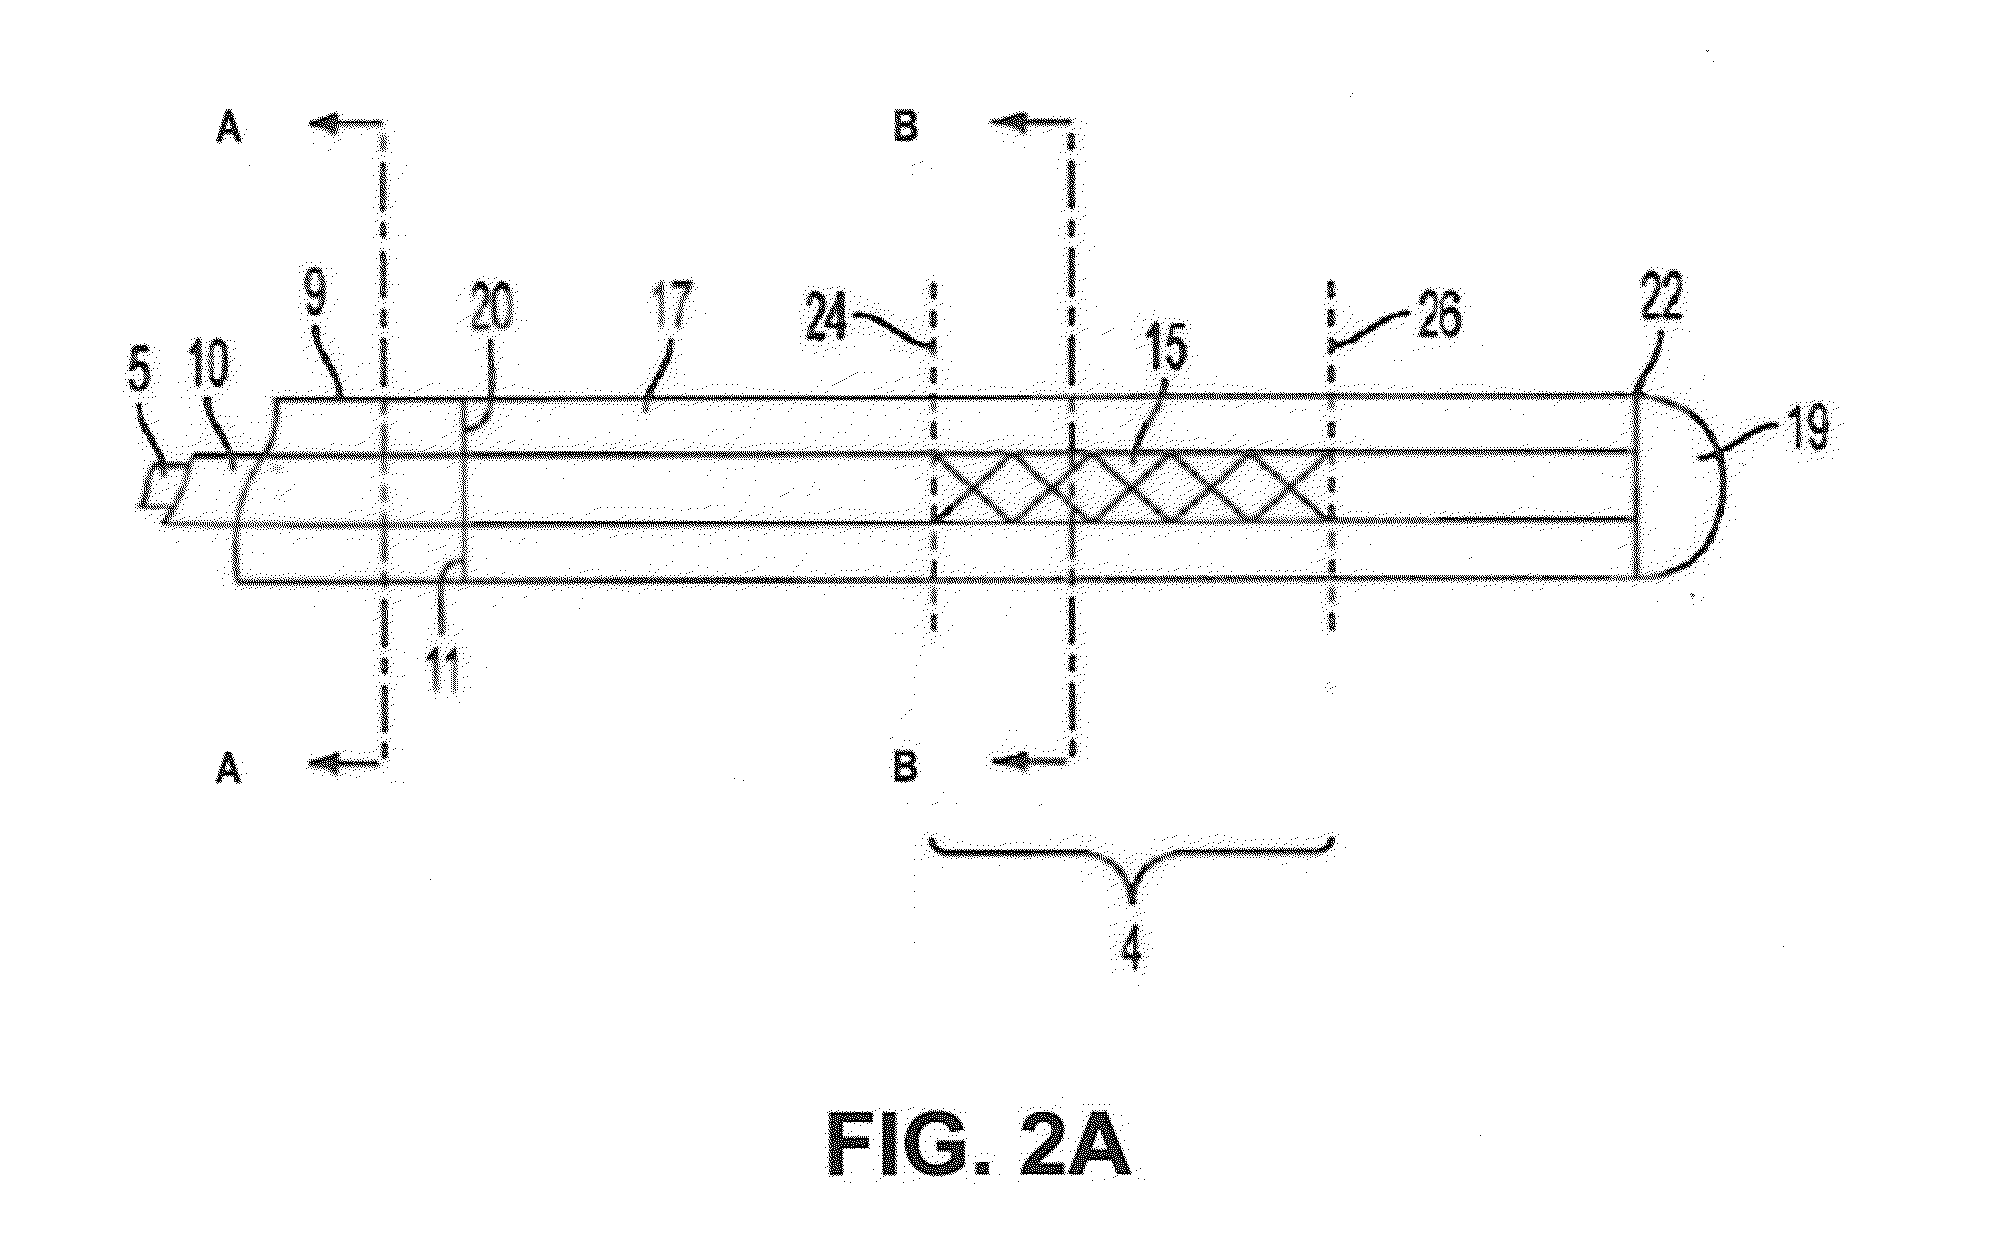 Laser Device and Method of Use